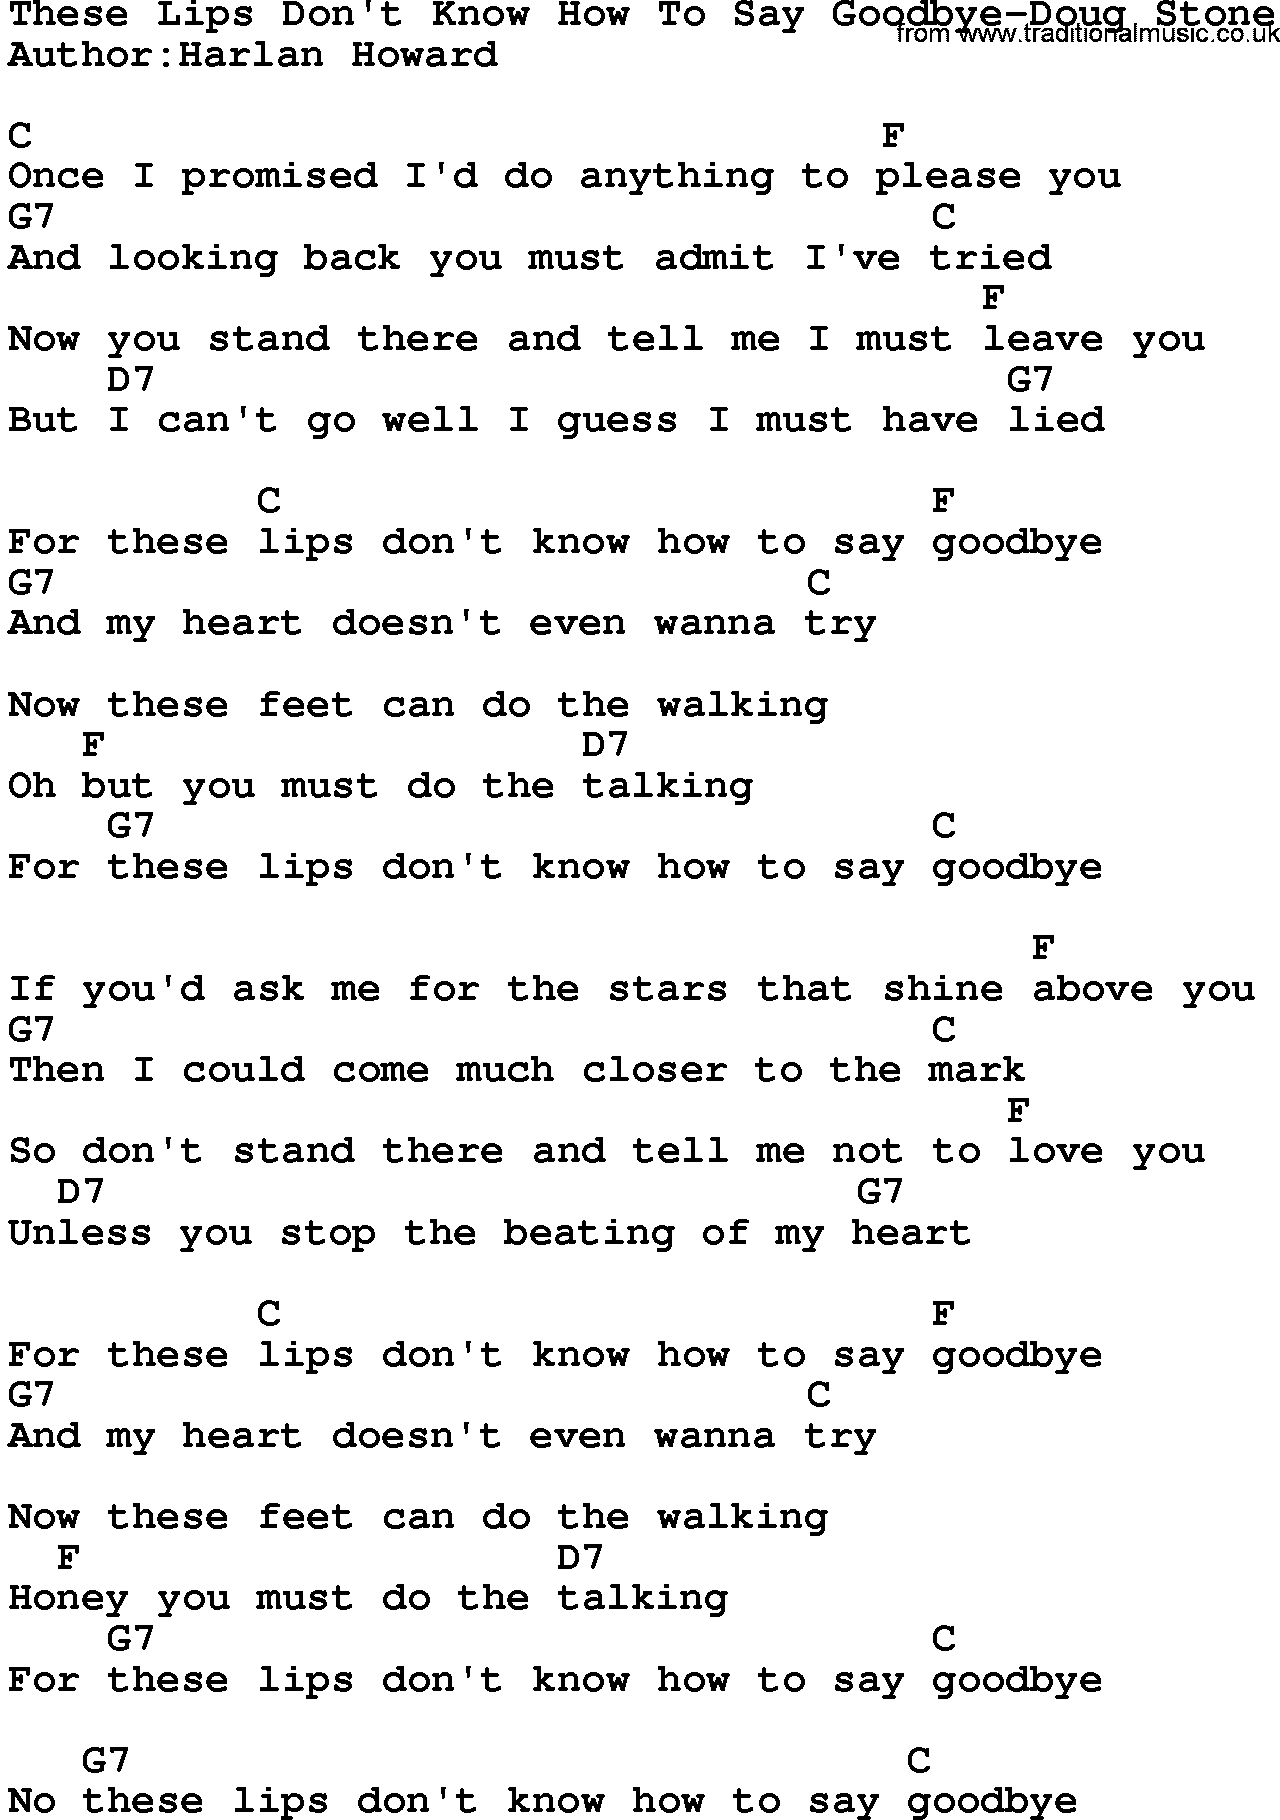 Country music song: These Lips Don't Know How To Say Goodbye-Doug Stone lyrics and chords